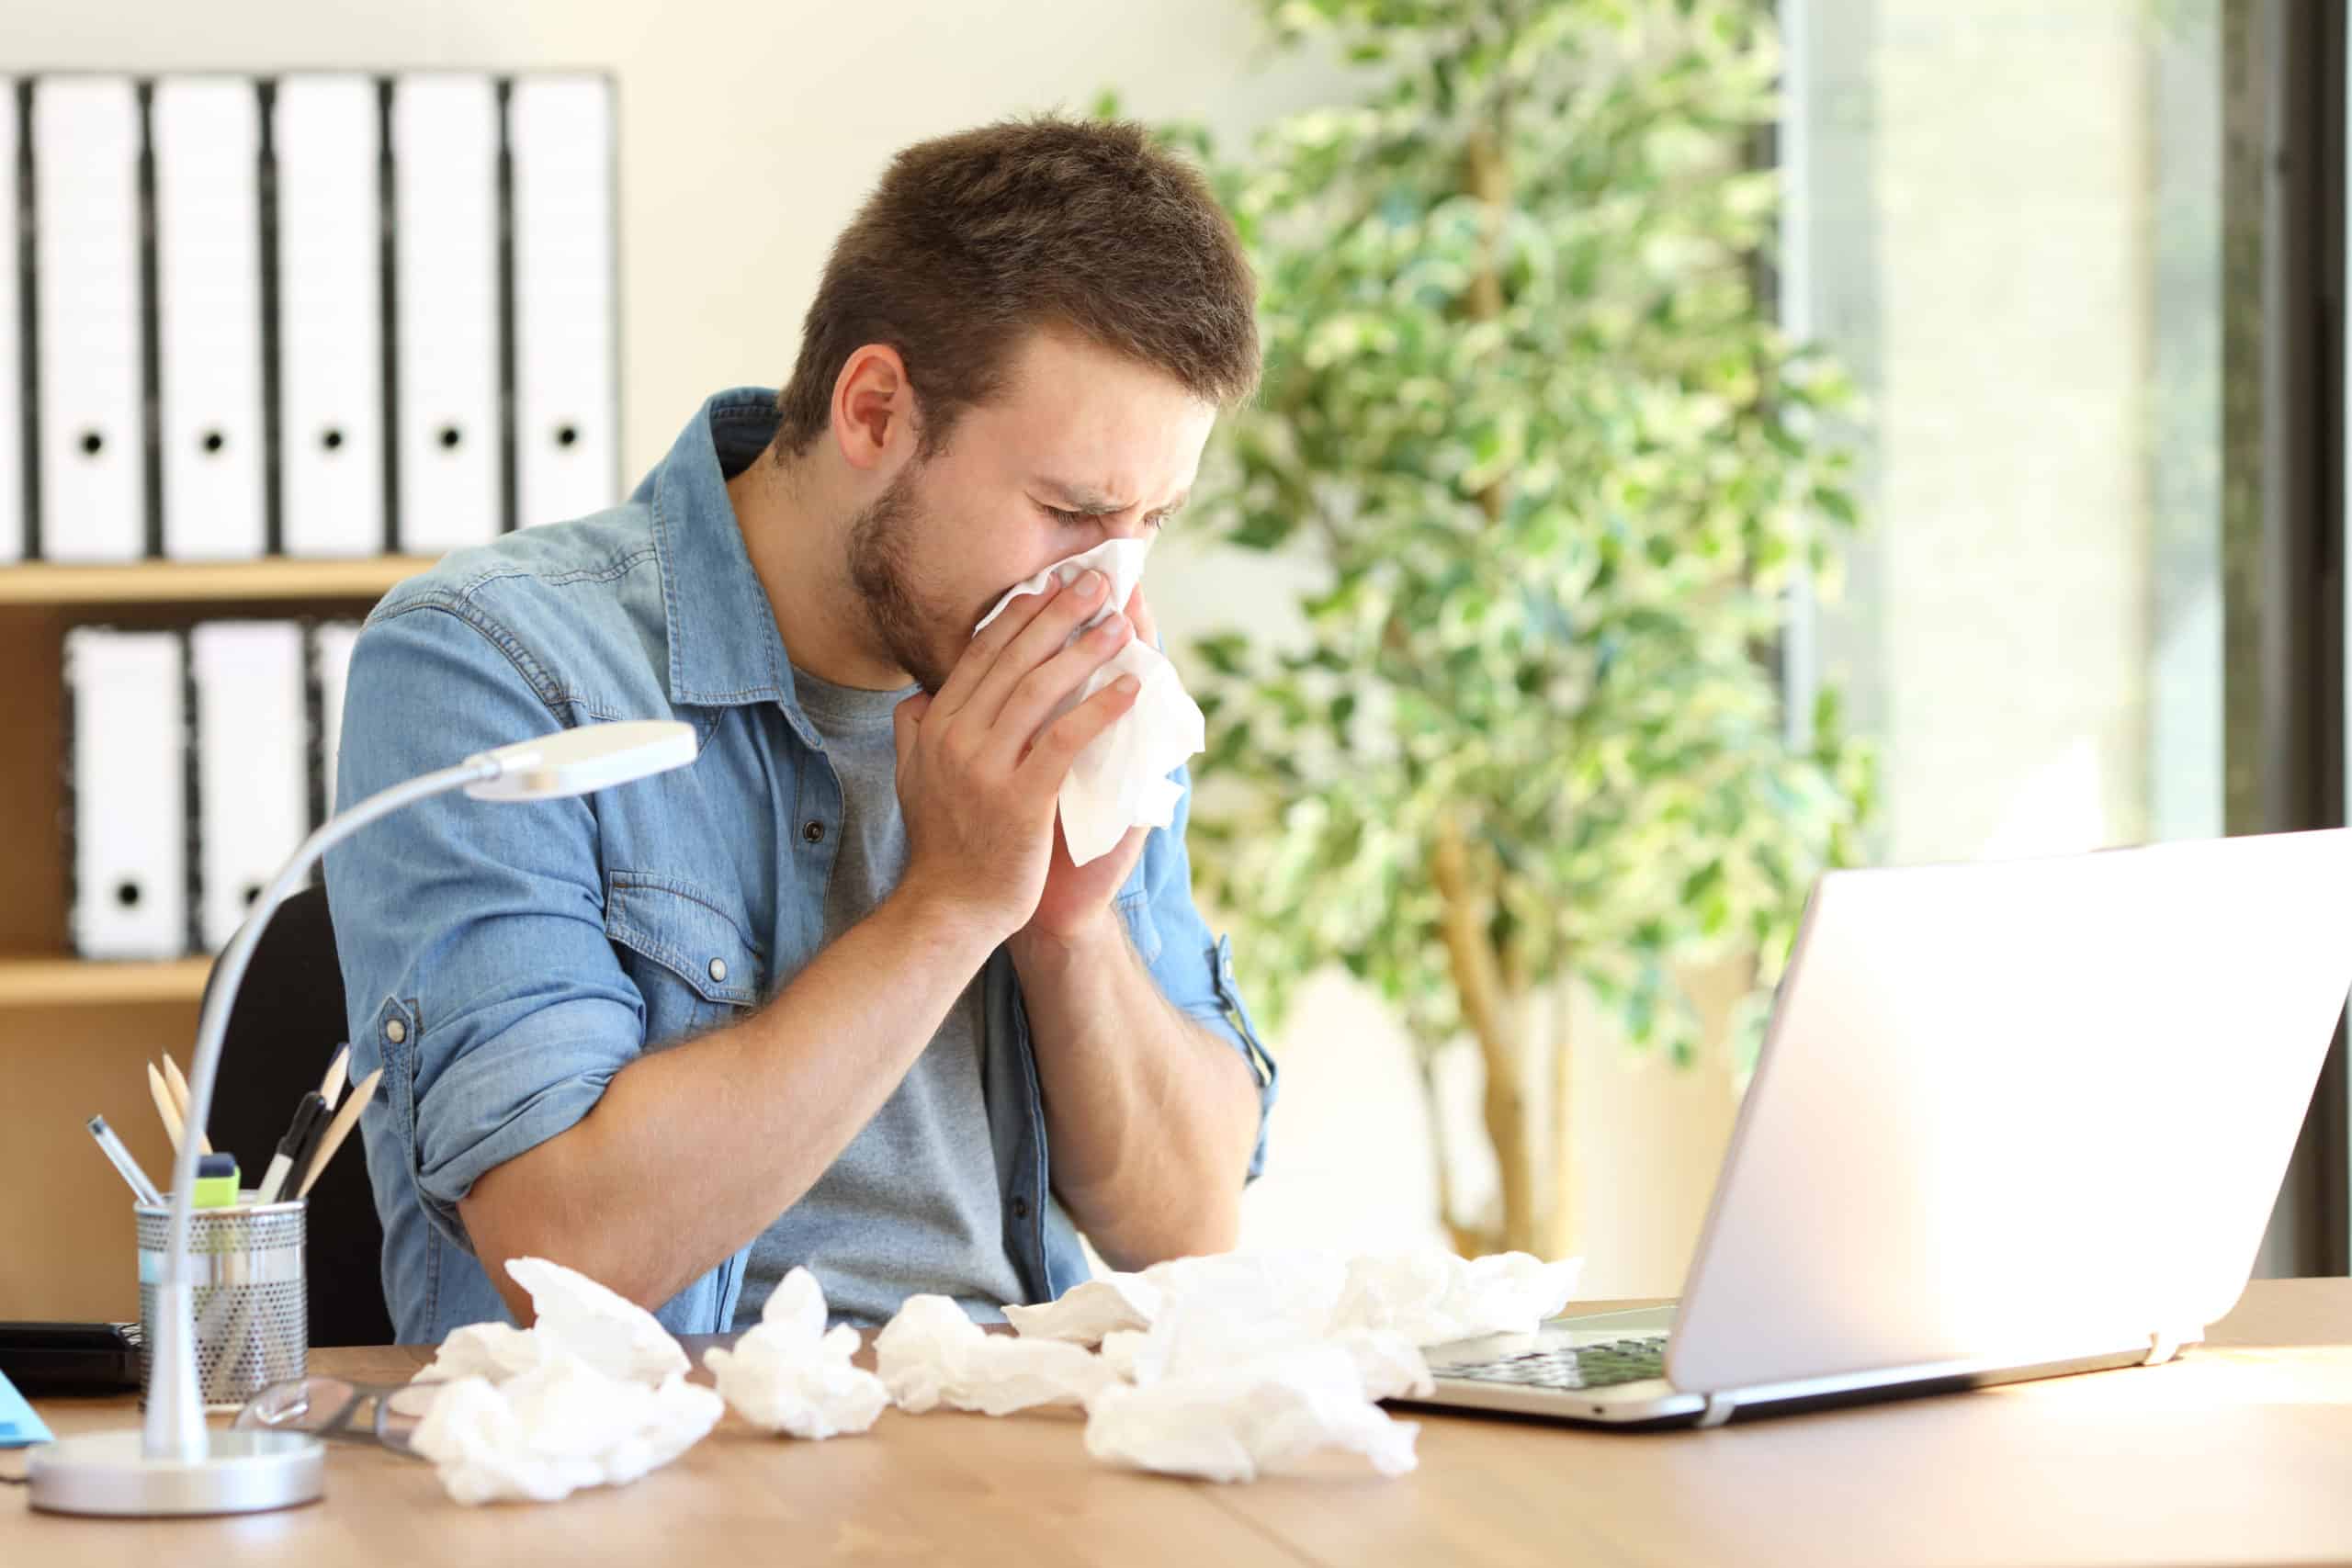 Dust & Dirt & Pollen, Oh My! [Your Indoor Air Quality Explained]